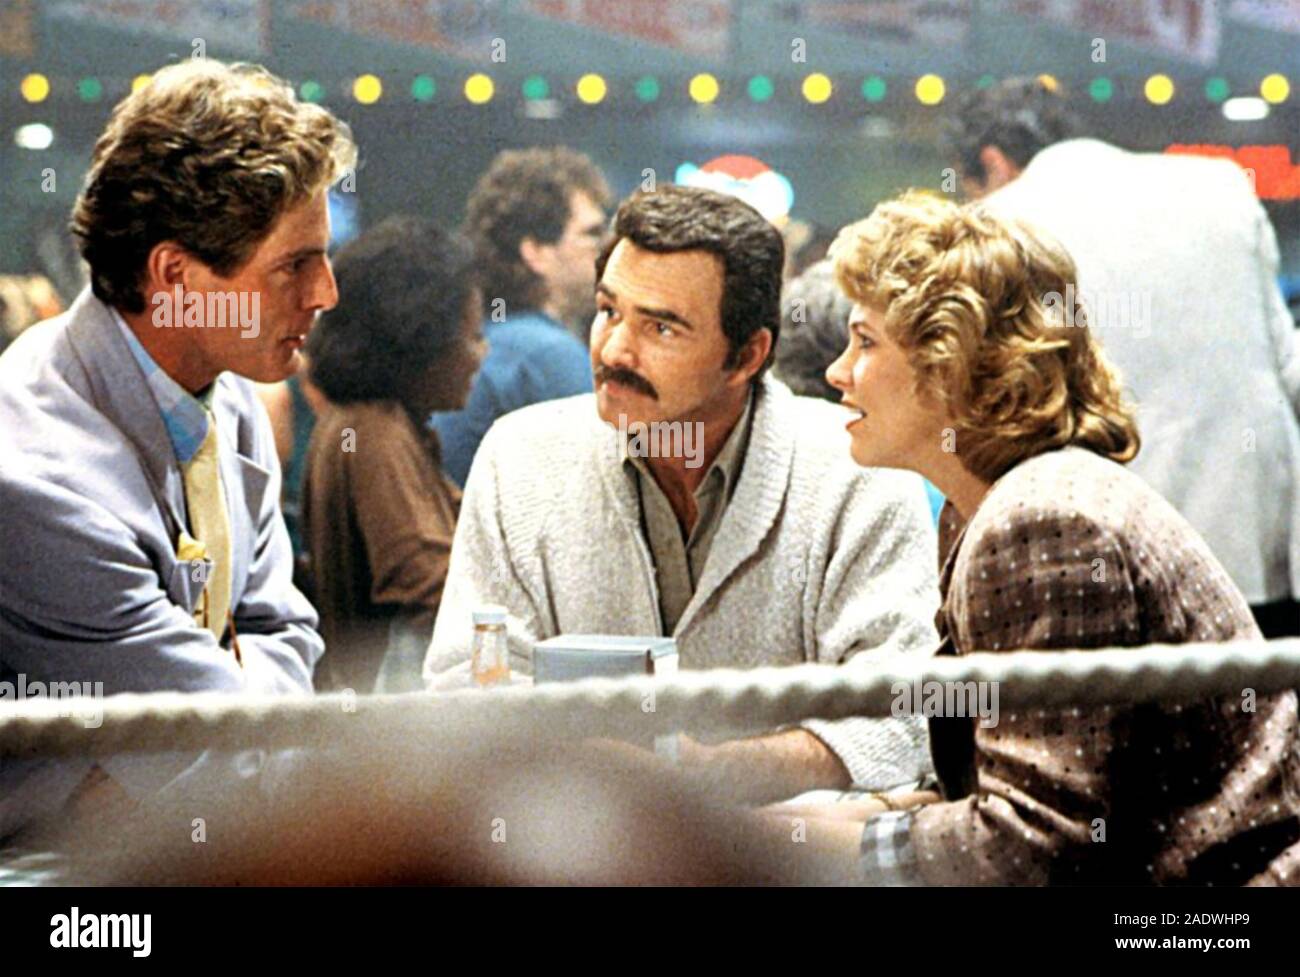 SWITCHING CHANNELS 1988 TriStar Pictures film with from left:   Christopher Reeve, Burt Reynolds, Kathleen Turner Stock Photo